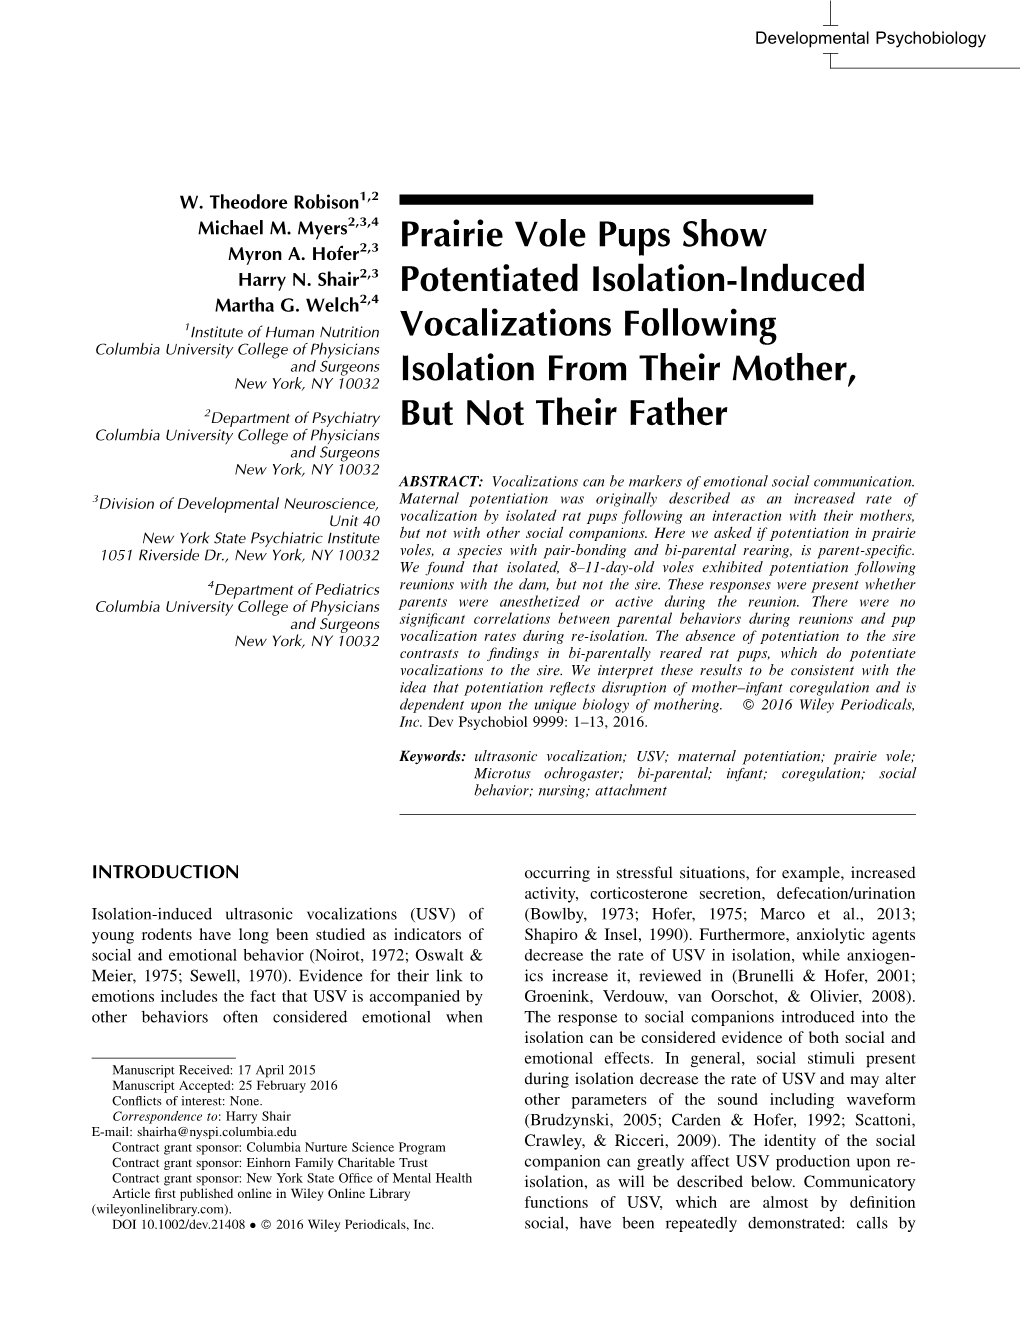 Prairie Vole Pups Show Potentiated Isolation-Induced Vocalizations Following Isolation from Their Mother, but Not Their Father